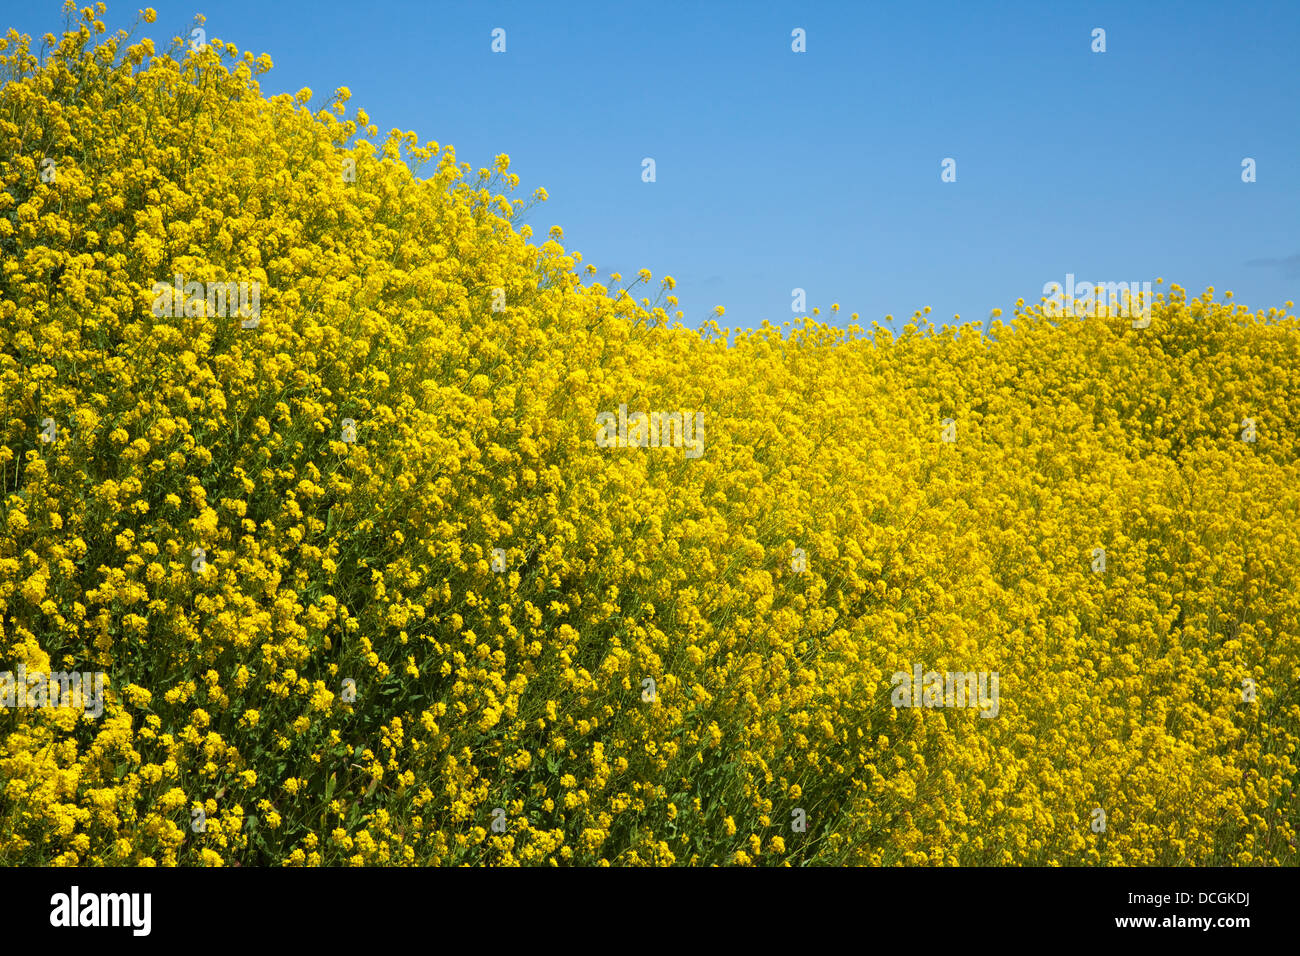 Yellow Blossoms On Trees Against A Blue Sky Near Goleen; County Cork, Ireland Stock Photo